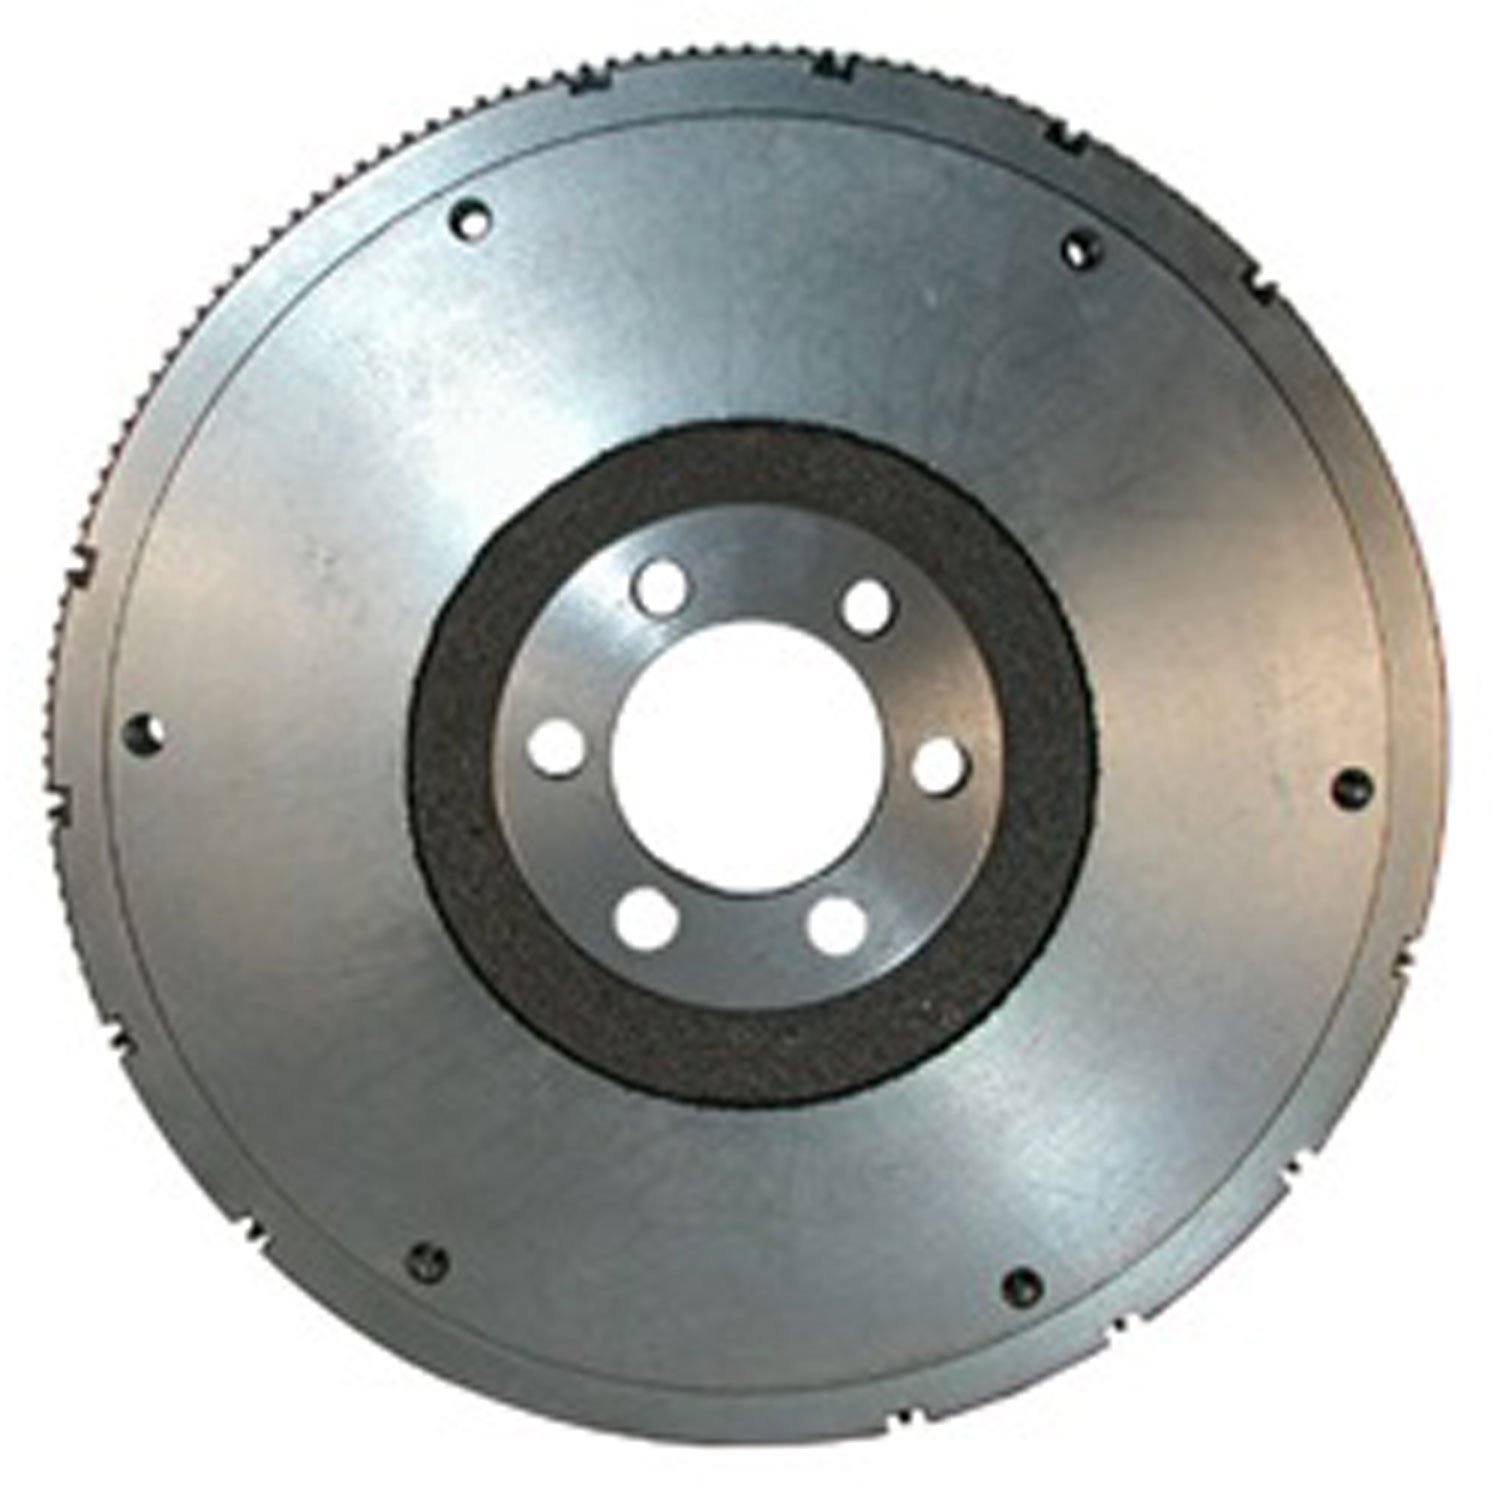 Replacement flywheel from Omix-ADA, Fits 91-99 Jeep Cherokees and Wrangler with a 4.0 liter engi